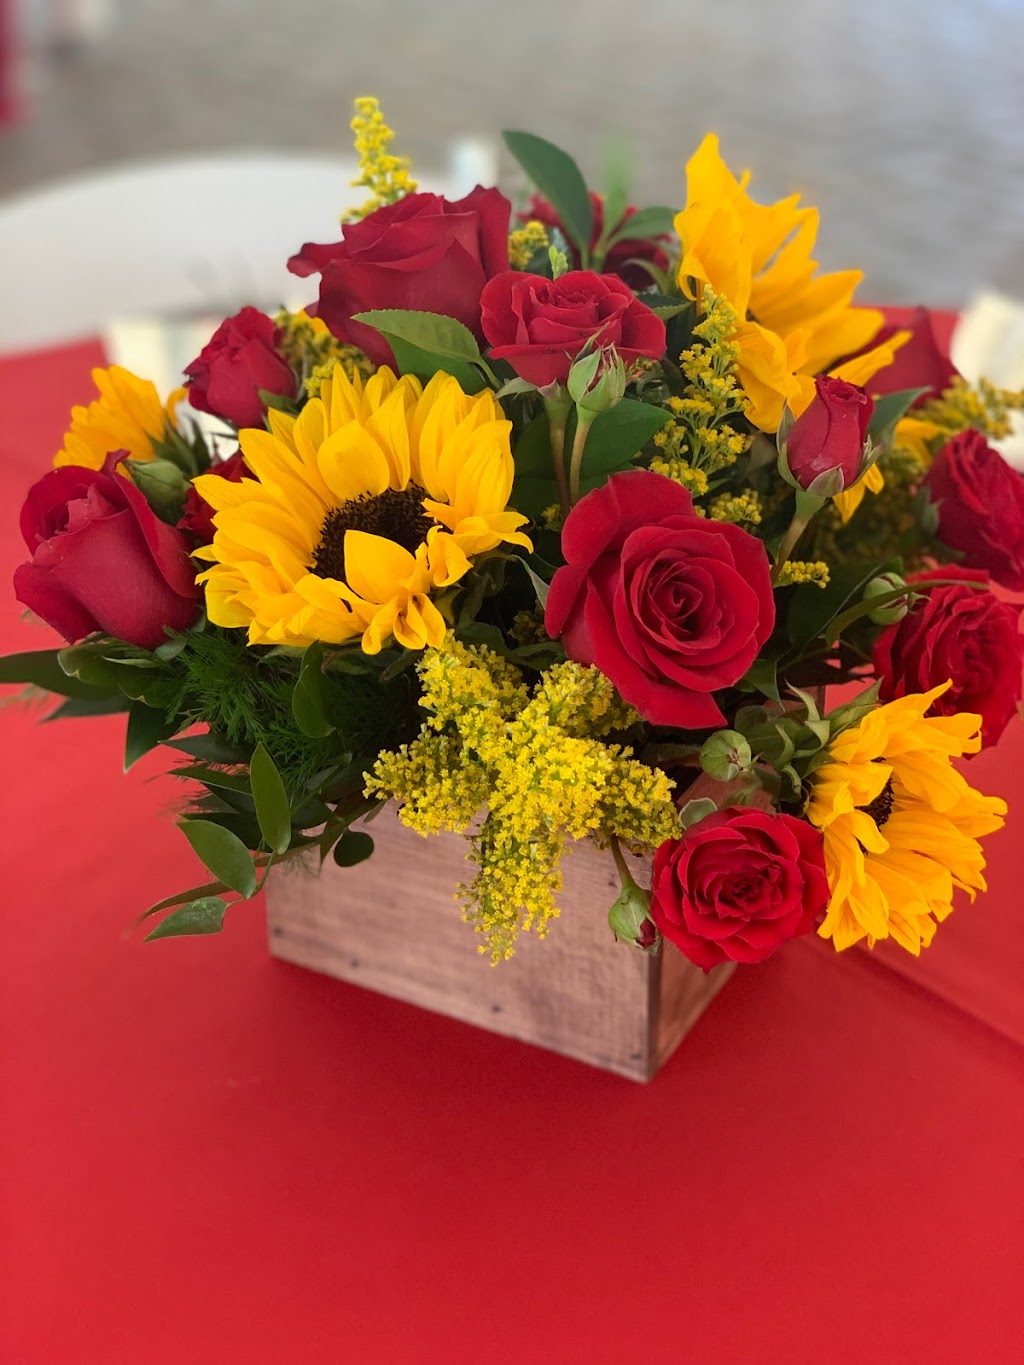 EXPRESSIONS FLORAL | 8880 Muraoka Dr, Gilroy, CA 95020 | Phone: (408) 842-8400